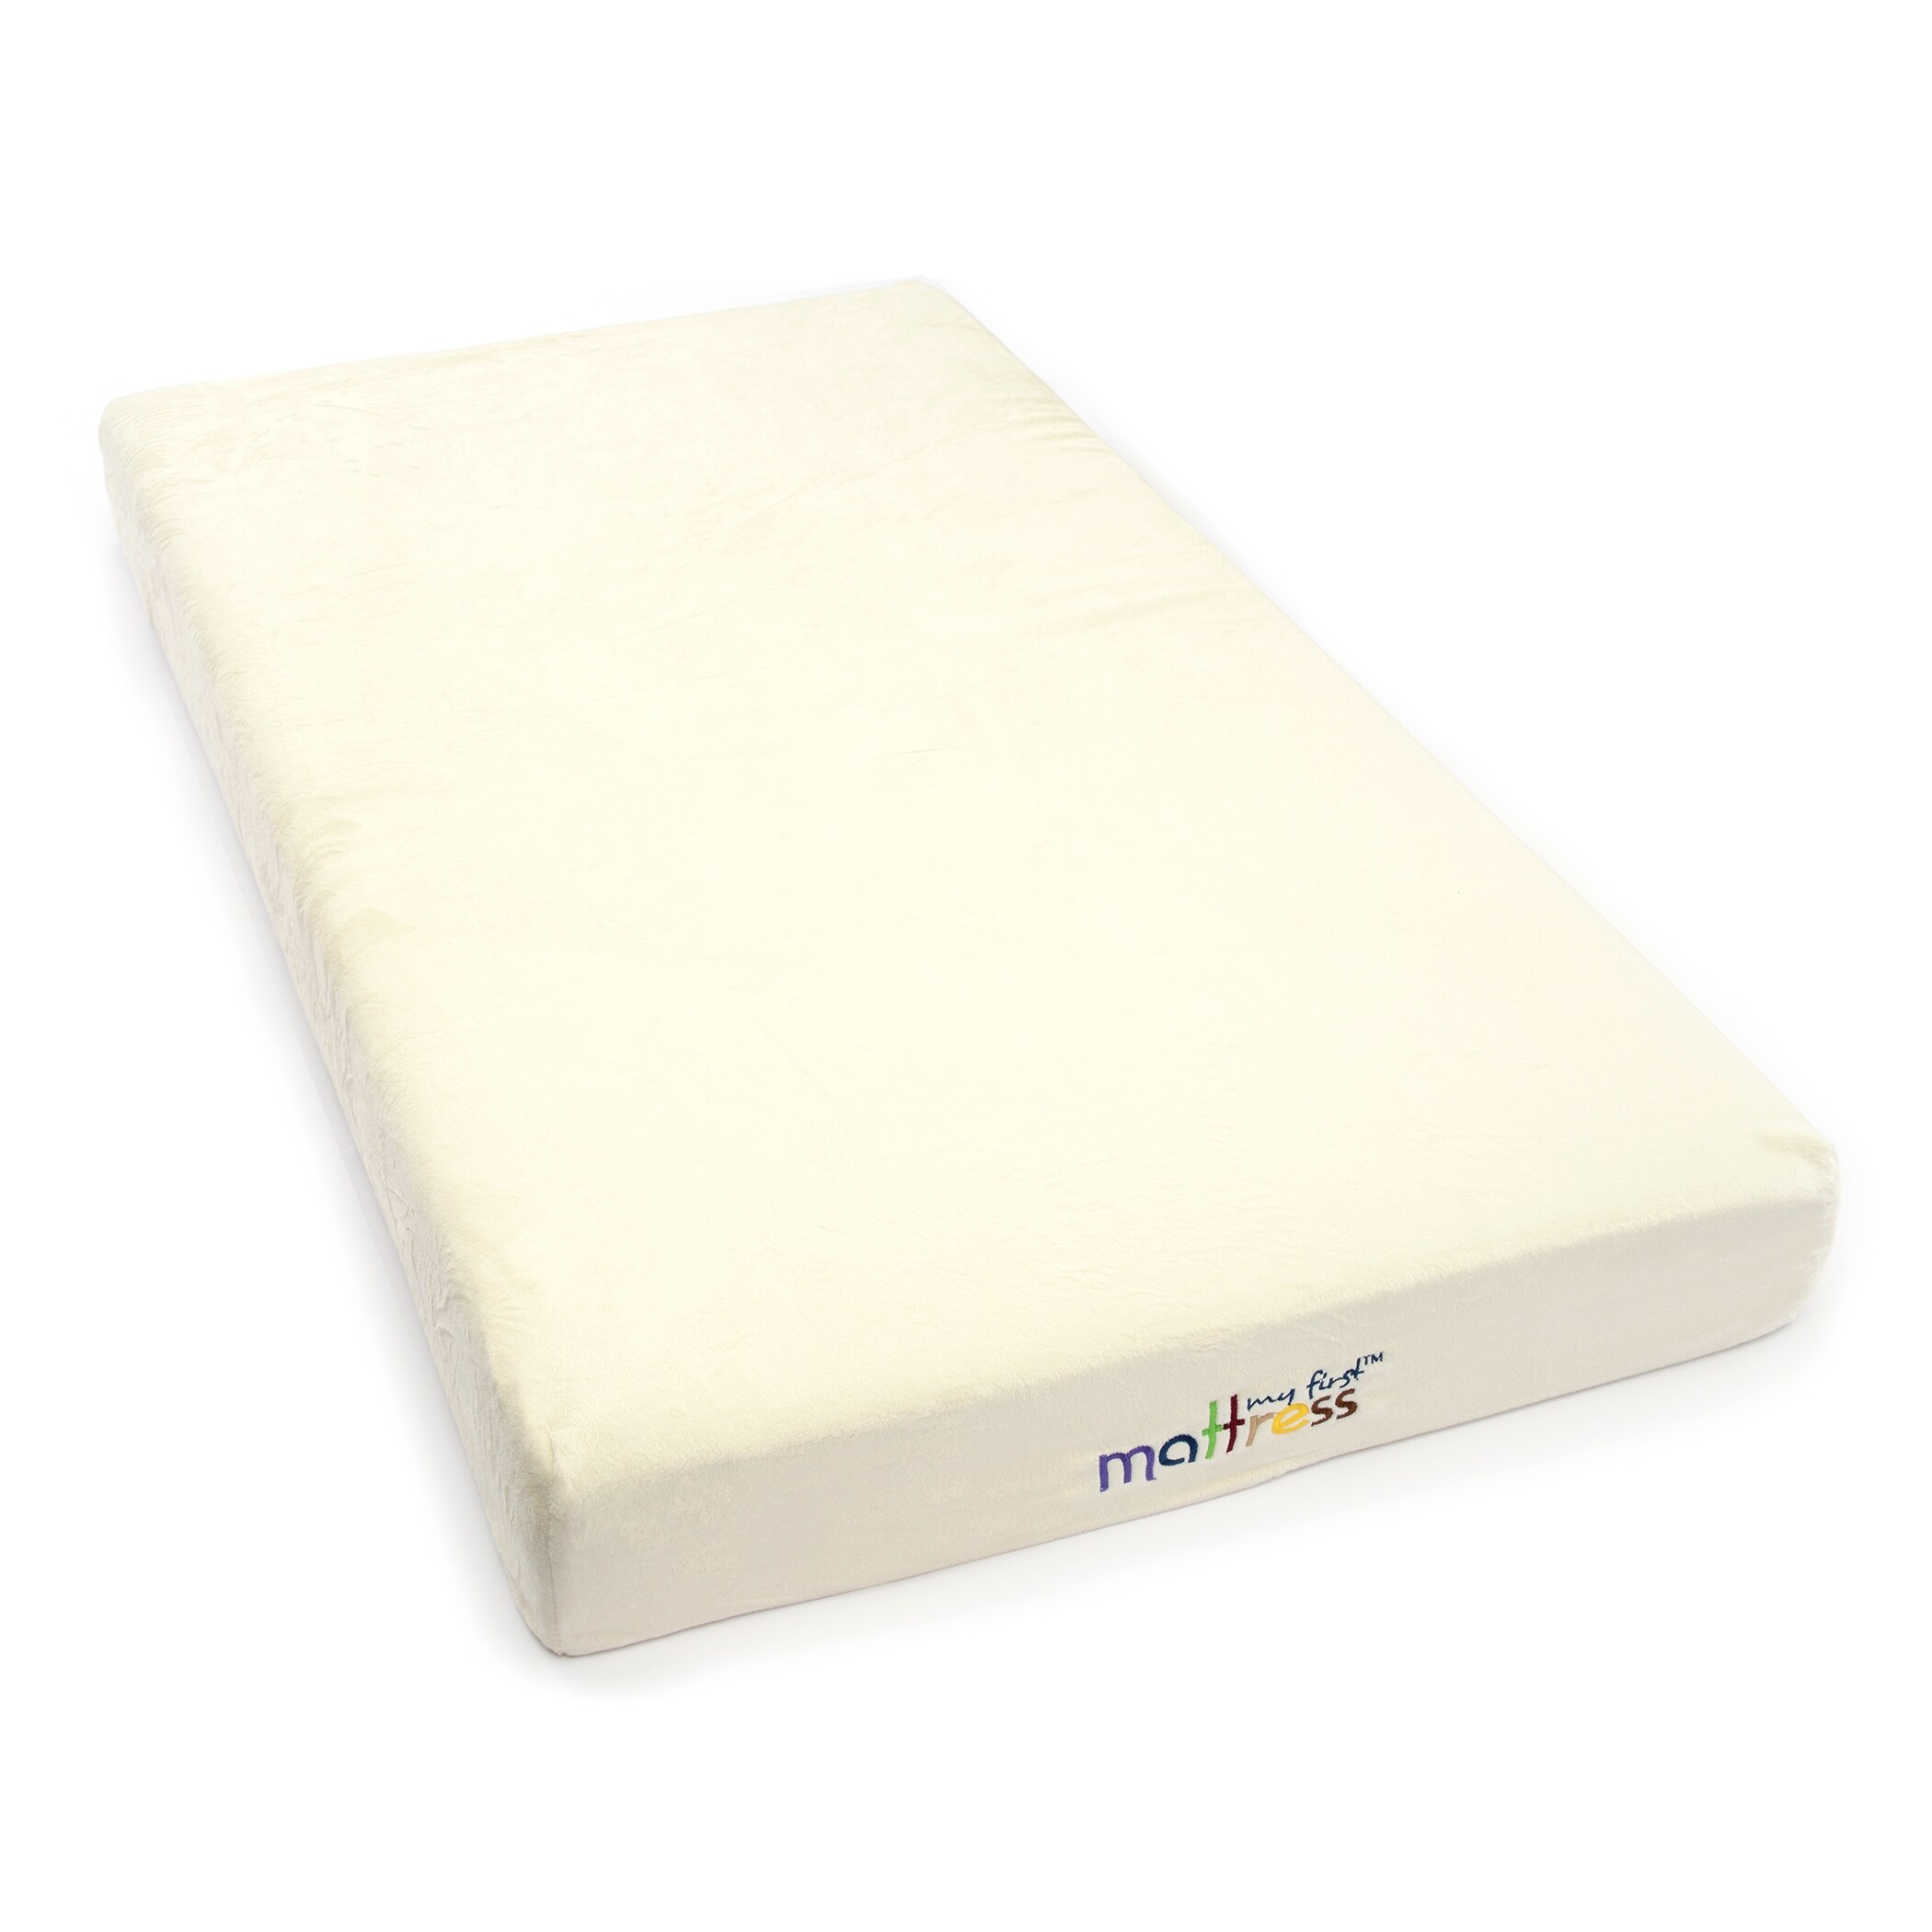 My First Memory Foam Baby Crib Mattress with Soft Waterproof Cover; Infant/ Toddler - On Sale - Bed Bath & Beyond - 6824948